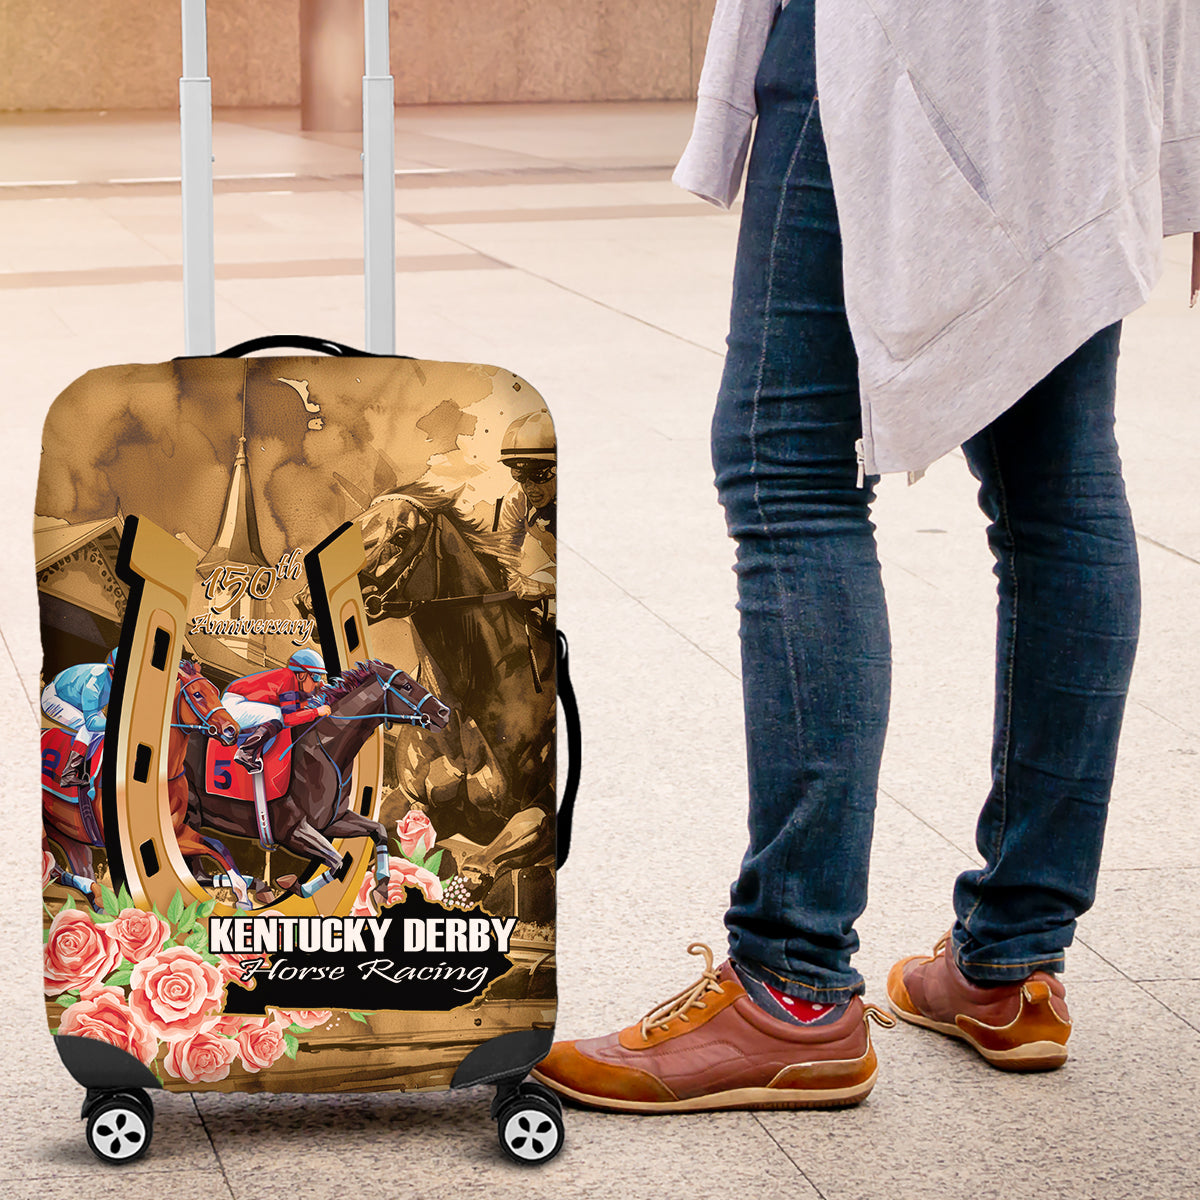 Kentucky Horse Racing Luggage Cover 150th Anniversary Race For The Roses